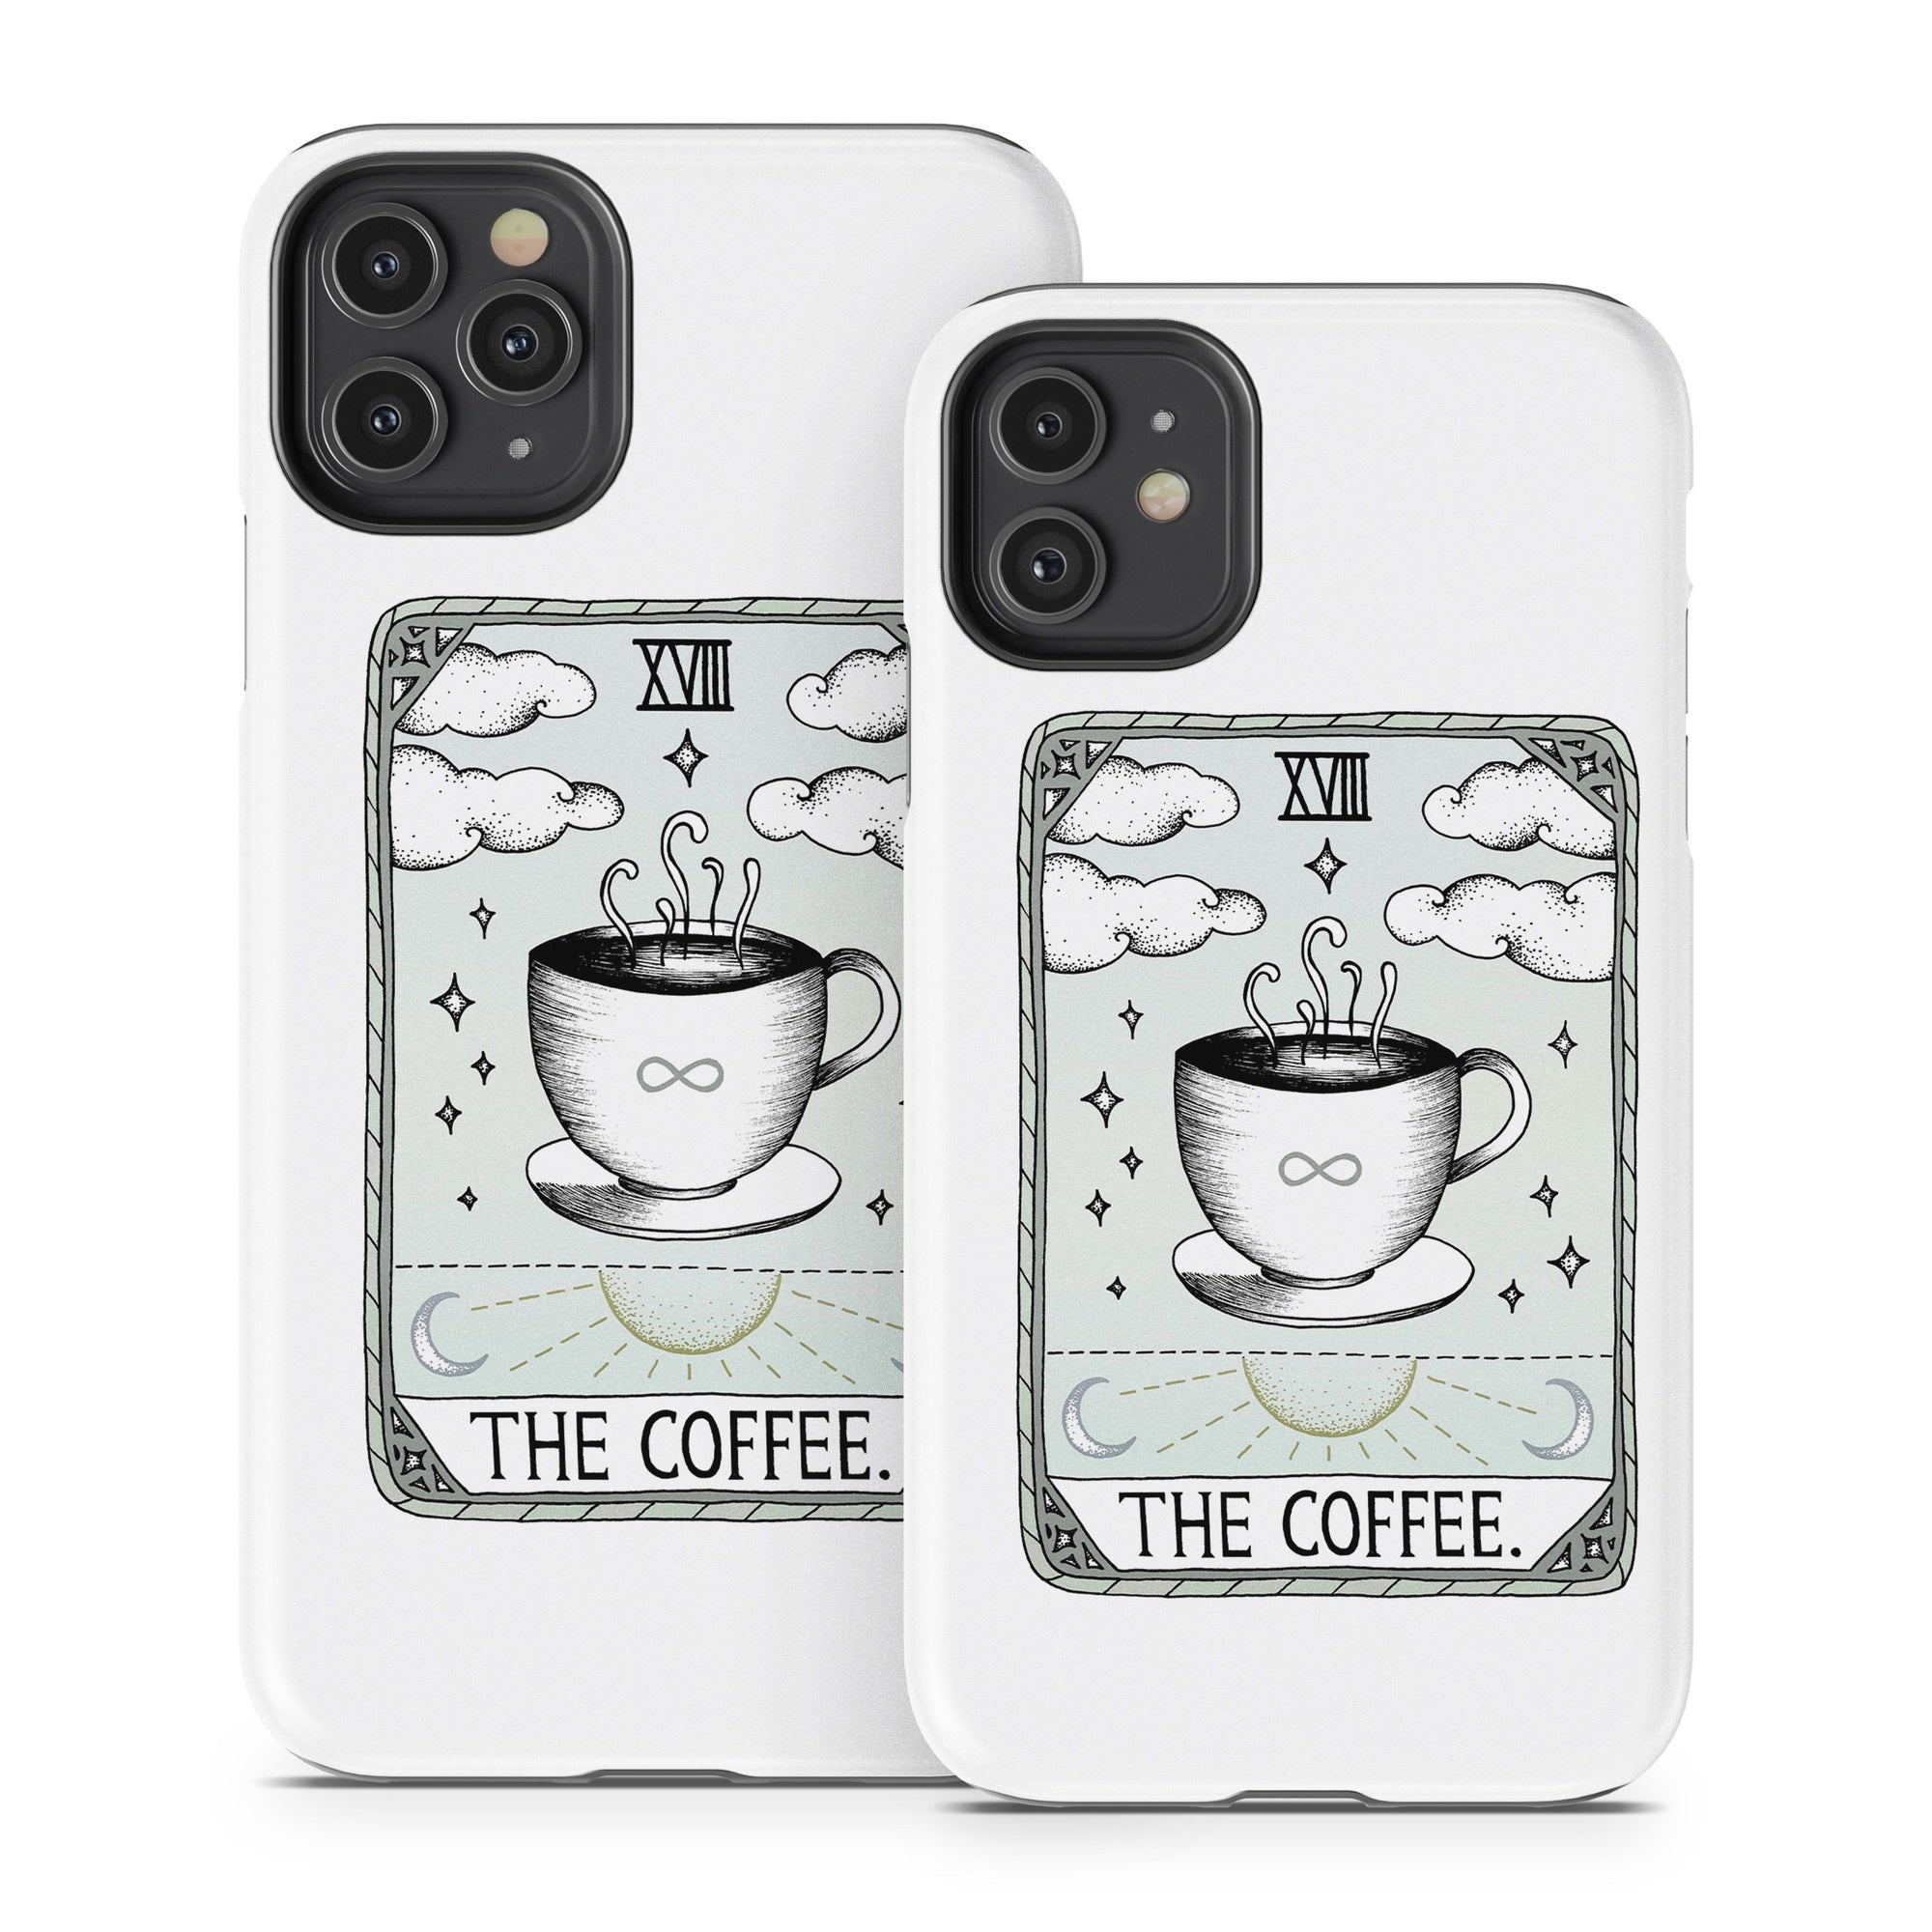 The Coffee - Apple iPhone 11 Tough Case